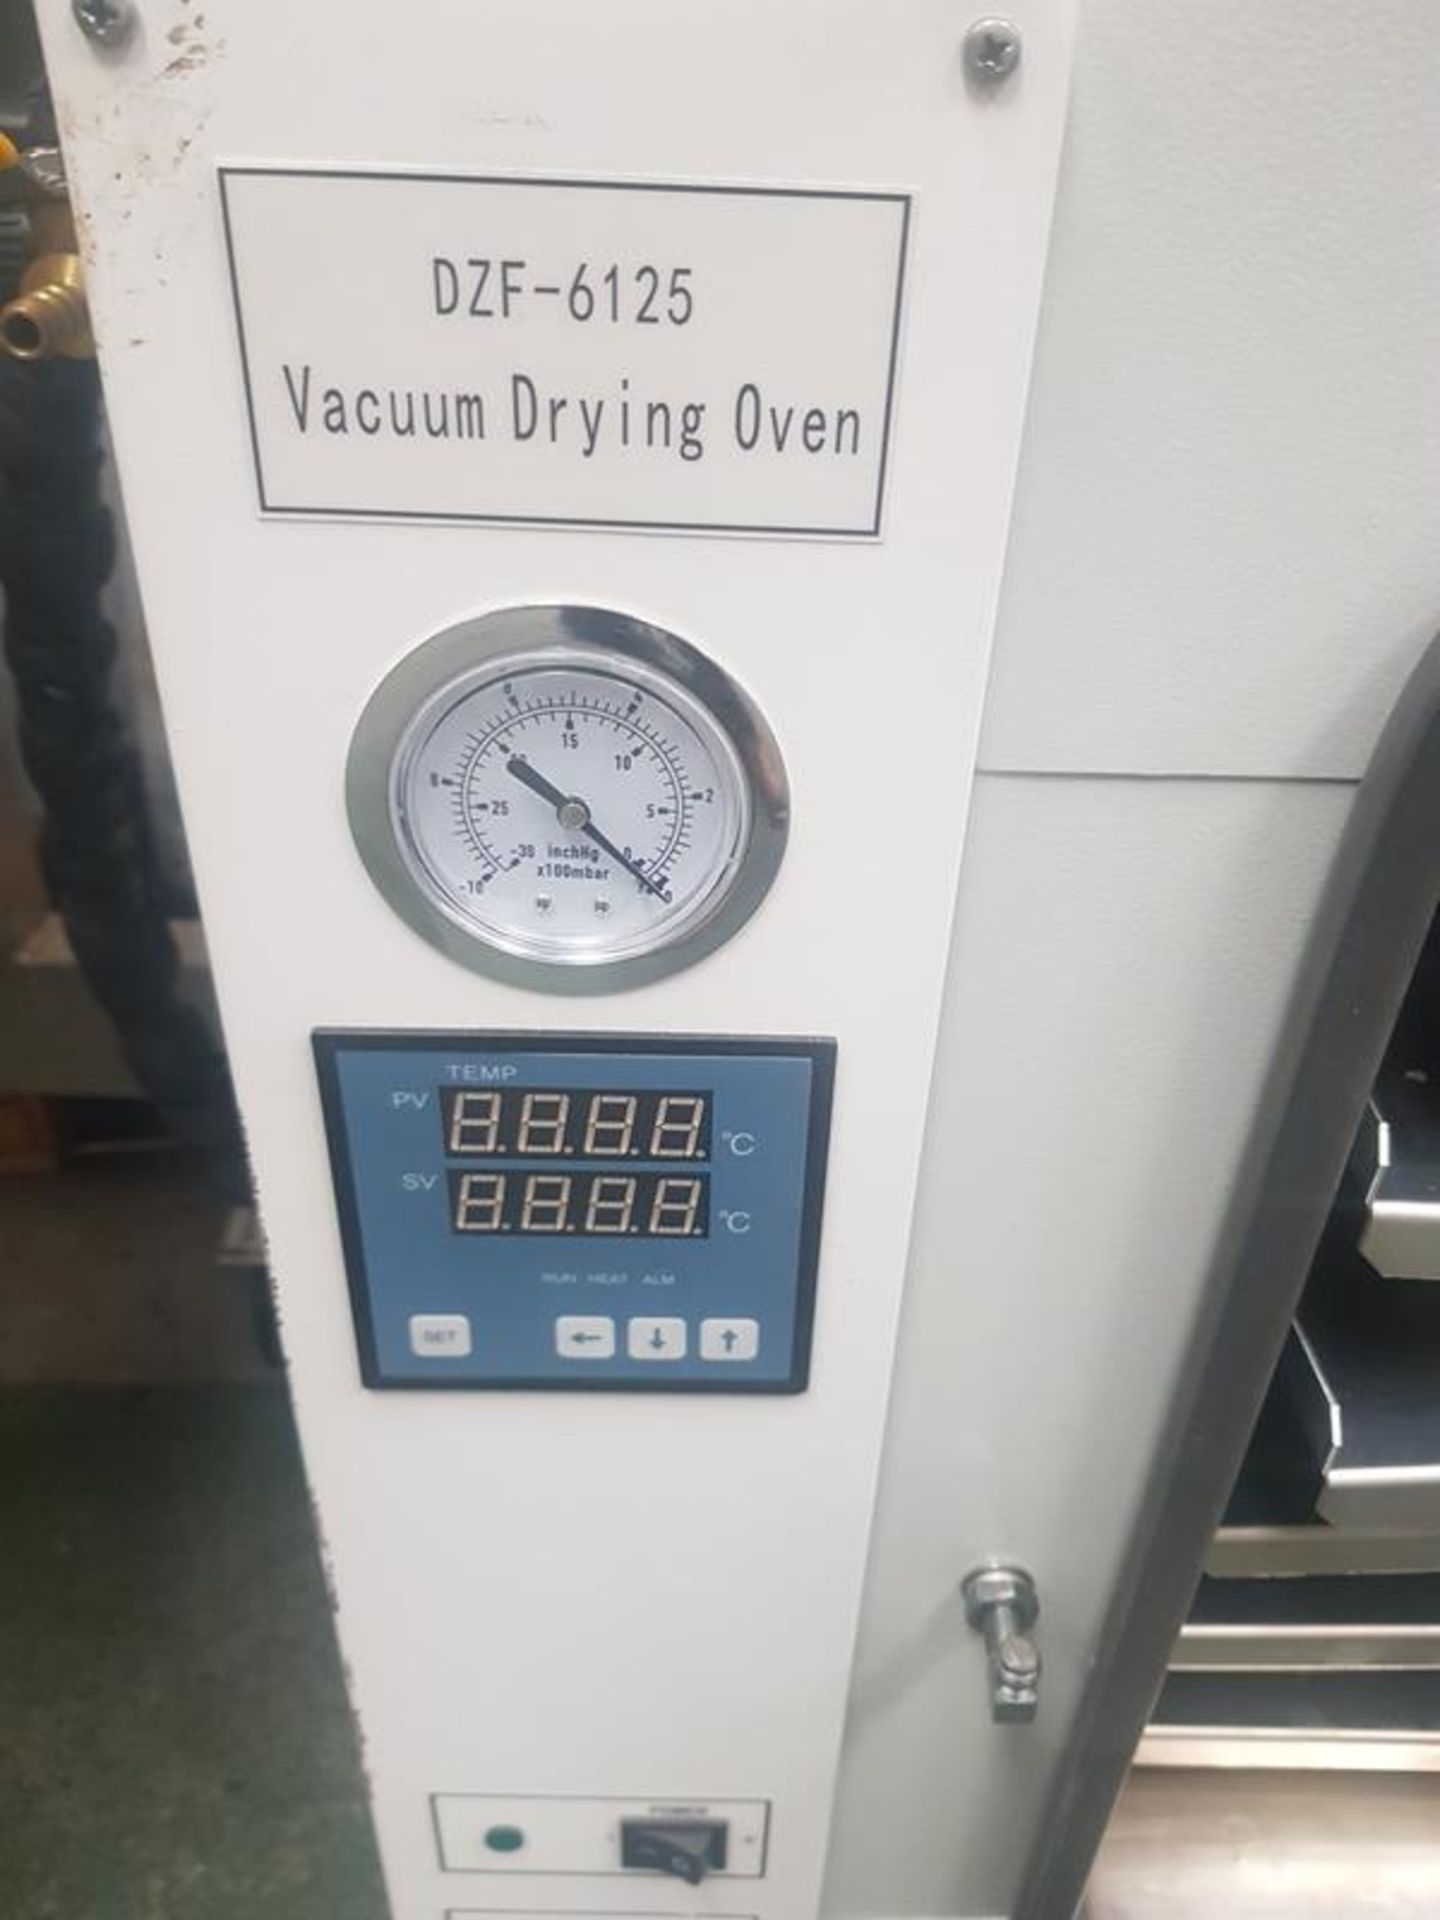 Vacuum Drying Oven, DZF-6125 complete with operating manual - Image 5 of 6